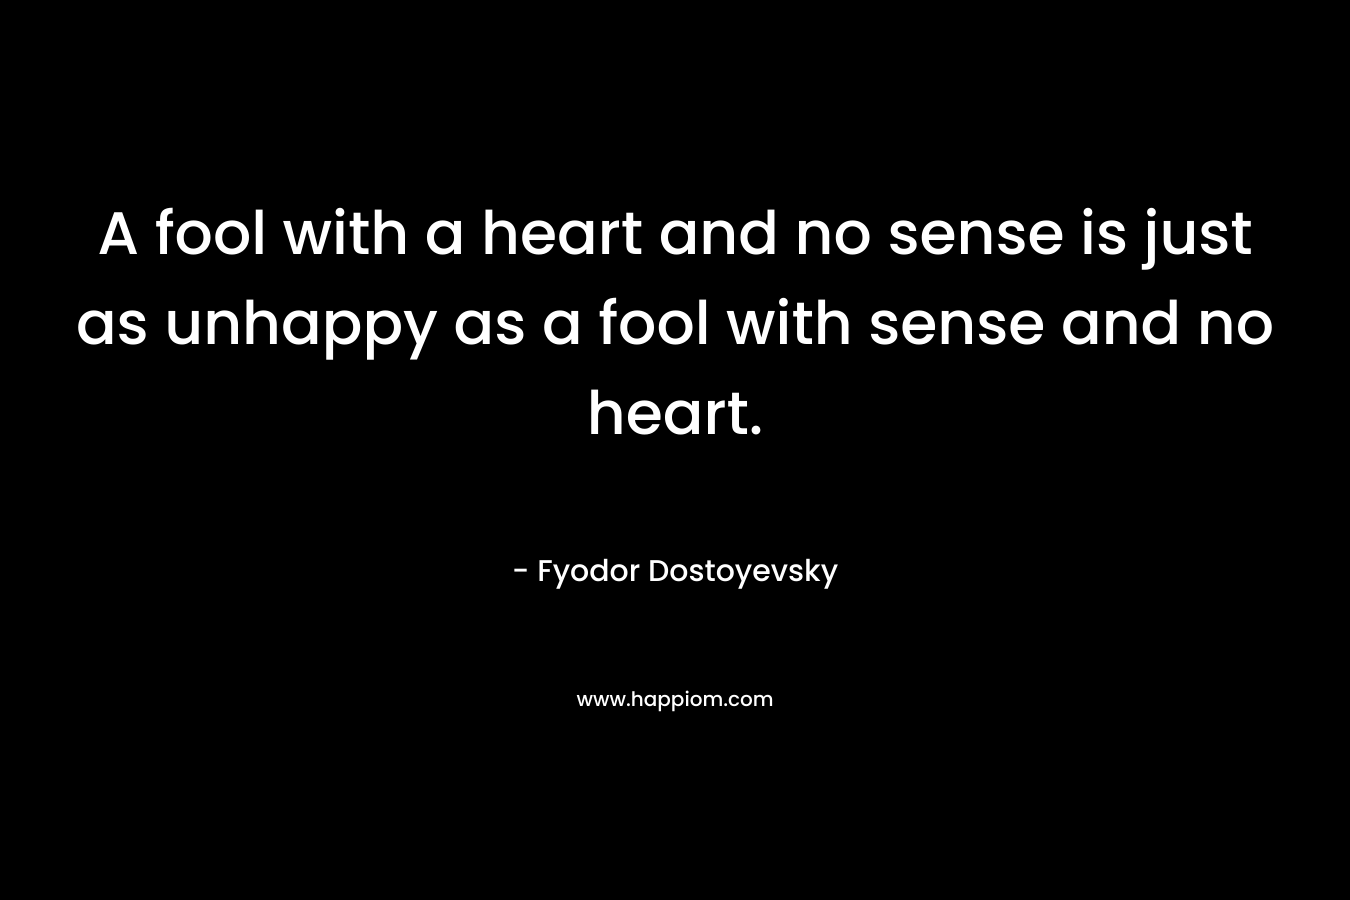 A fool with a heart and no sense is just as unhappy as a fool with sense and no heart.